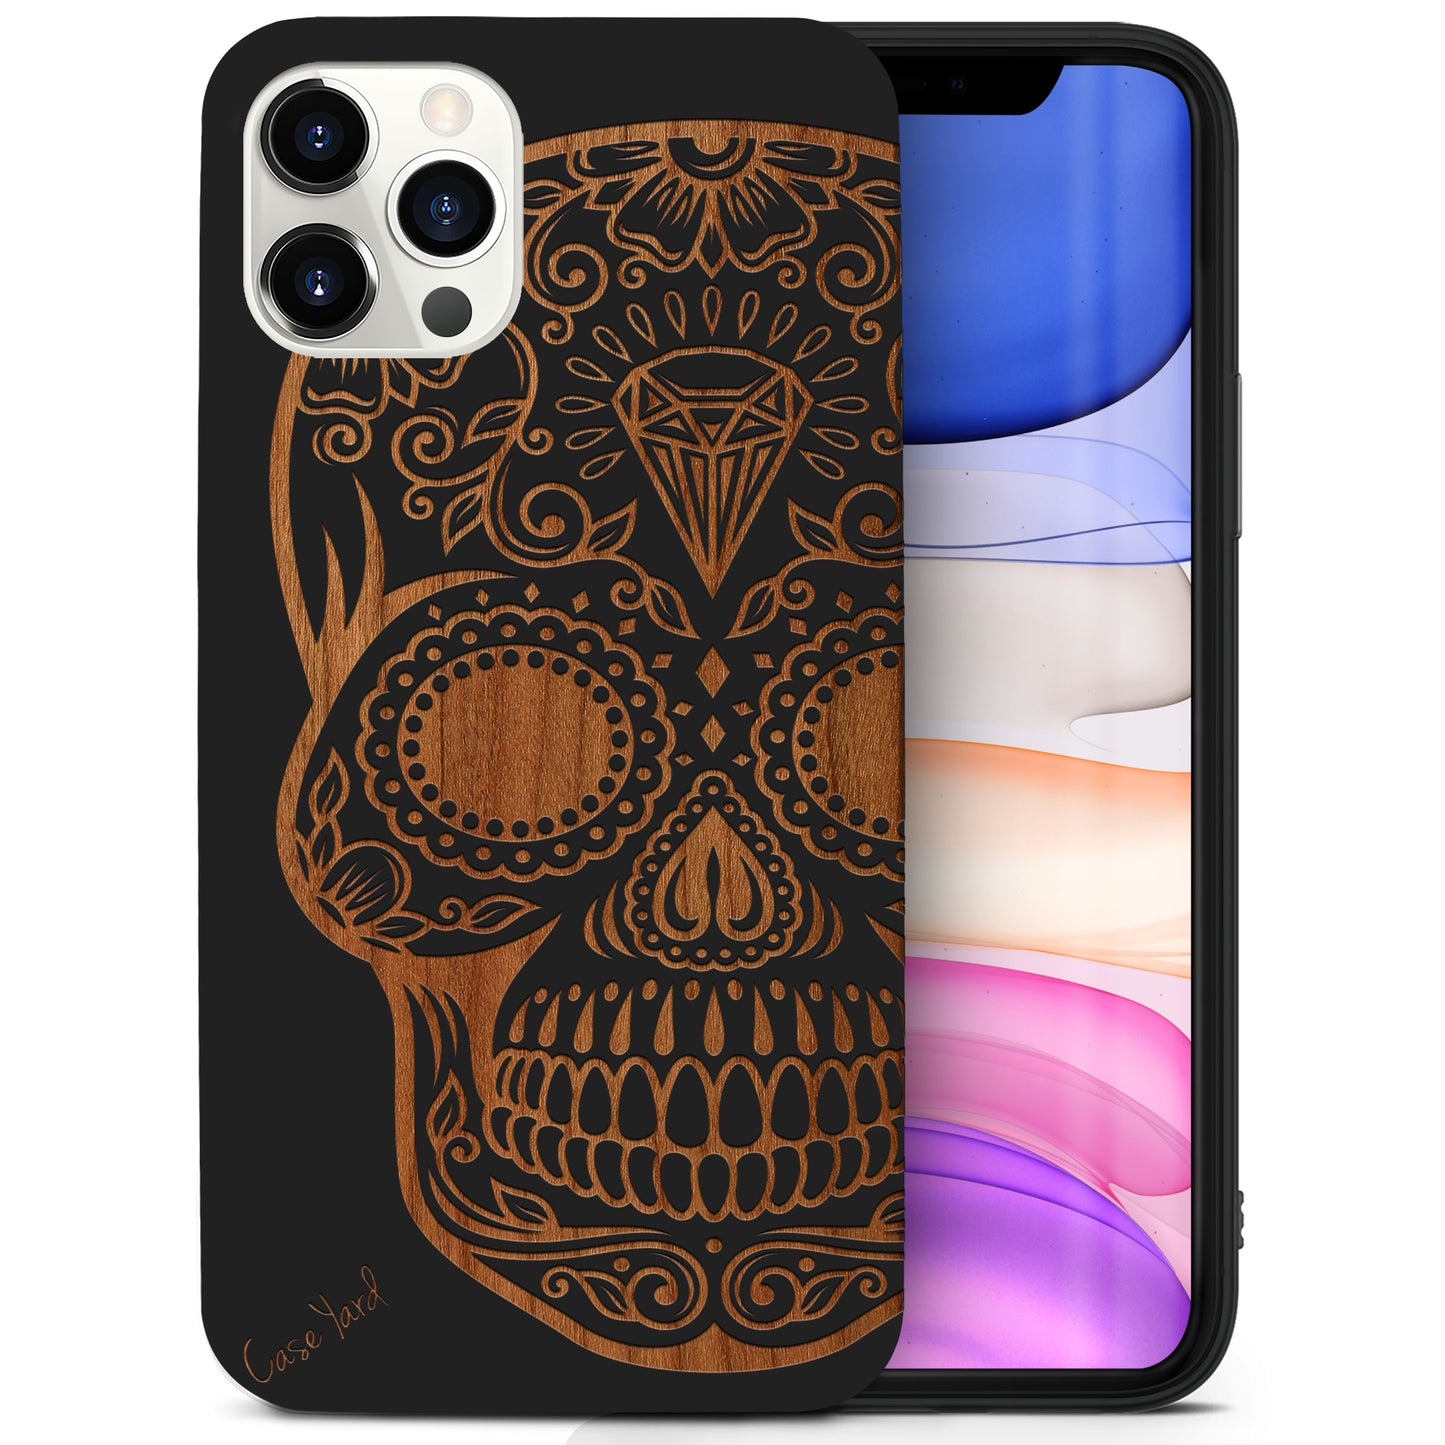 Wooden Cell Phone Case Cover, Laser Engraved case for iPhone & Samsung phone Diamond Skull Design